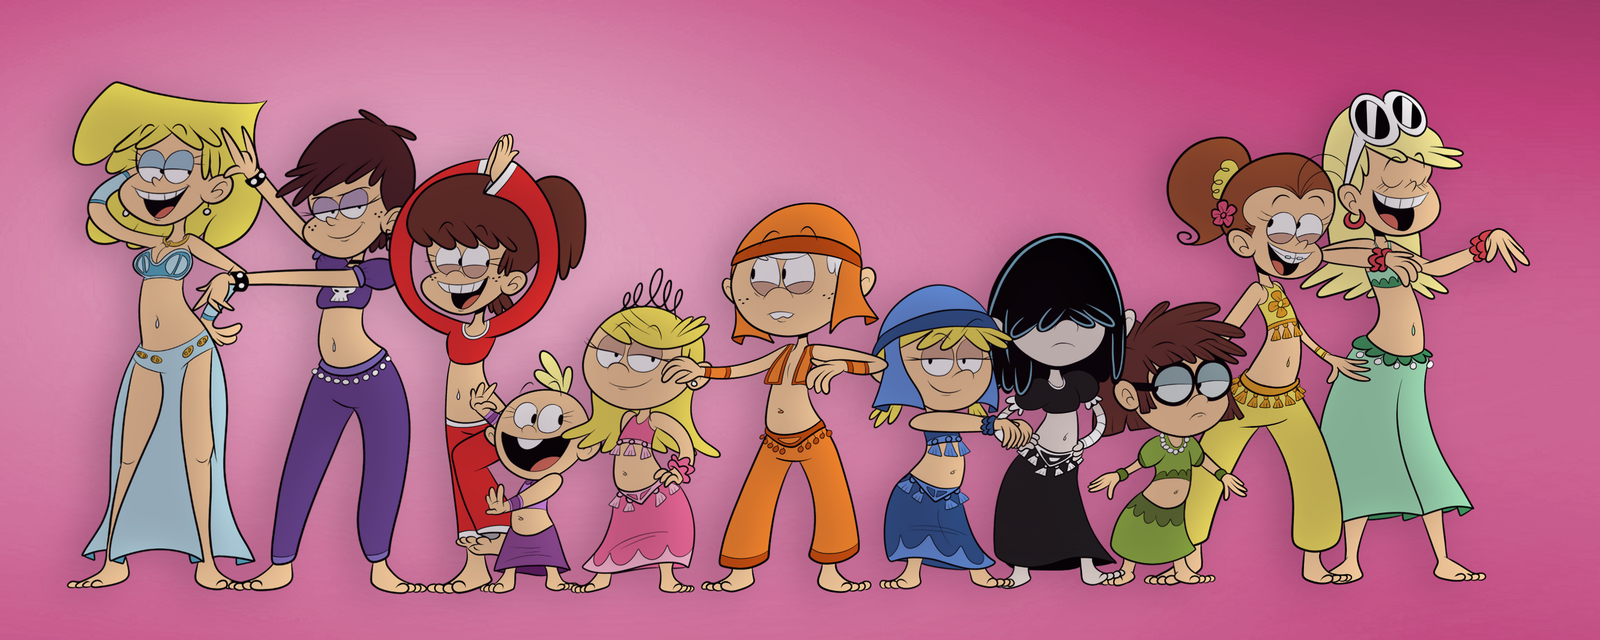 ELEVEN ROSES OF THE SERAL - My noisy house, , Harem, The loud House, Art, Sisters